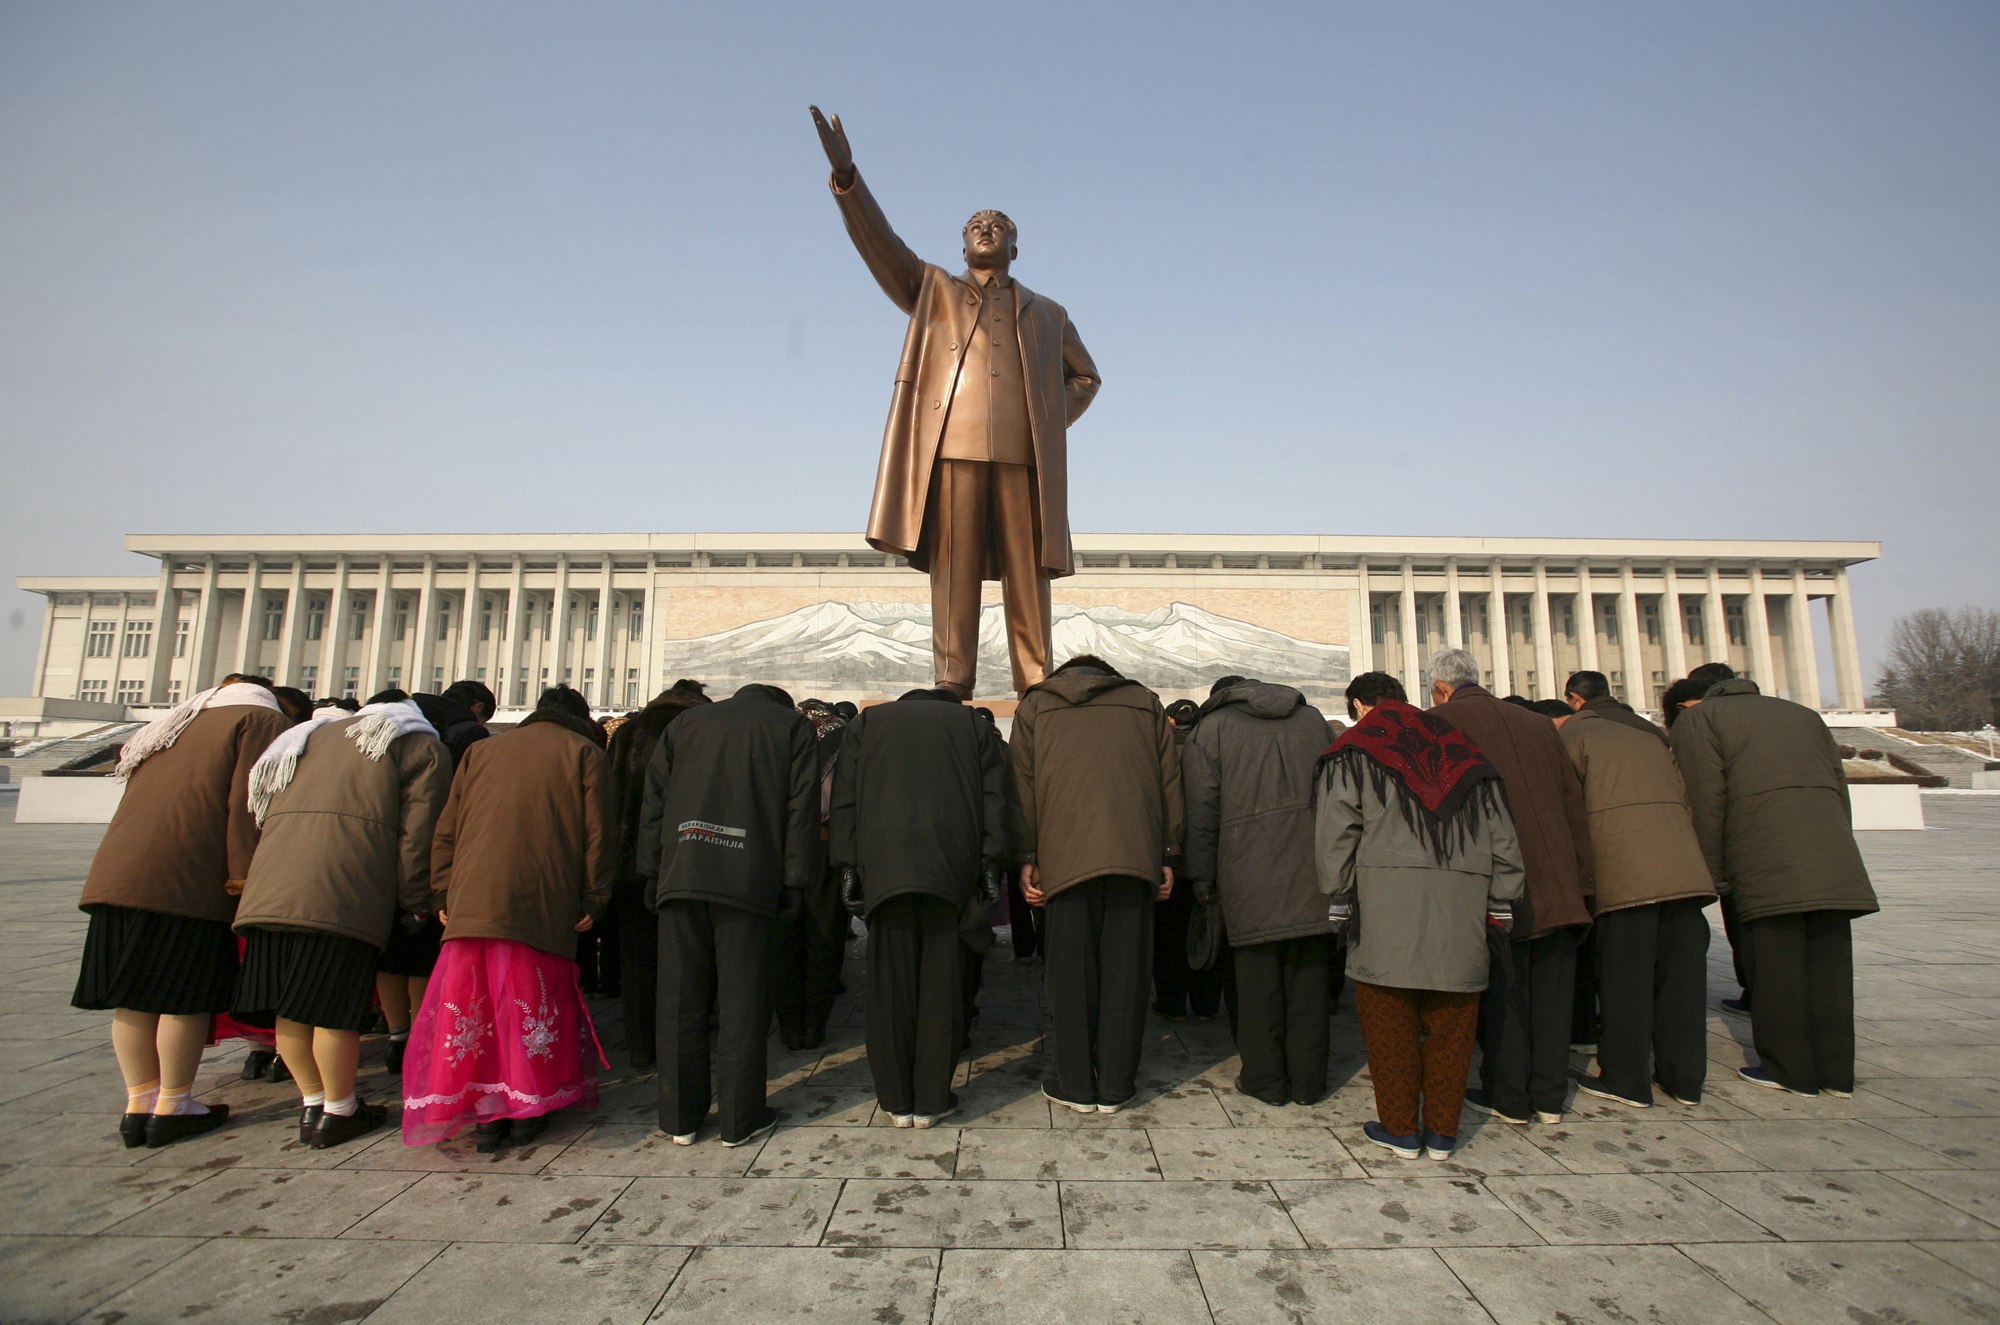 People bow in front of a statue of Kim Il Sung in Pyongyang, North Korea, Feb. 26, 2008.